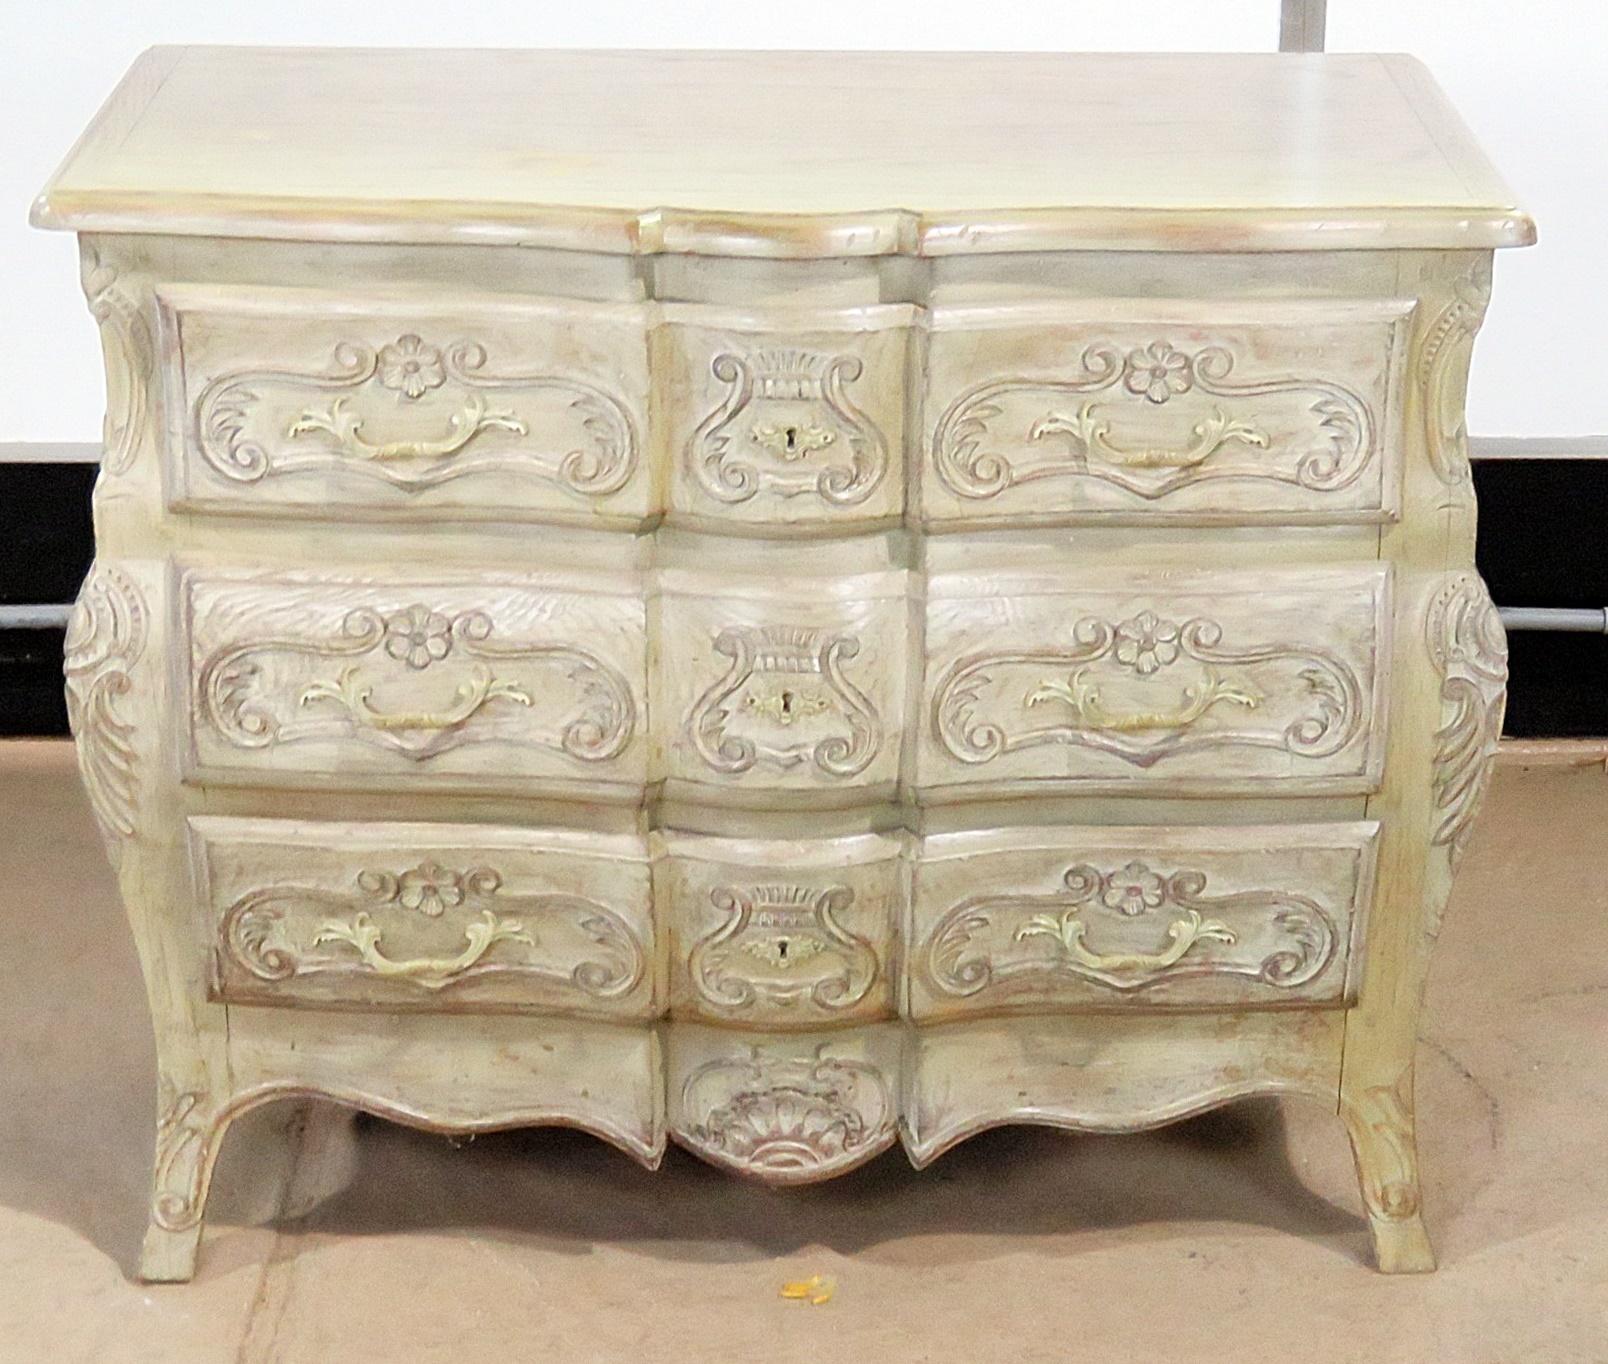 Auffray style country French style 3-drawer commode with a distressed painted finish.